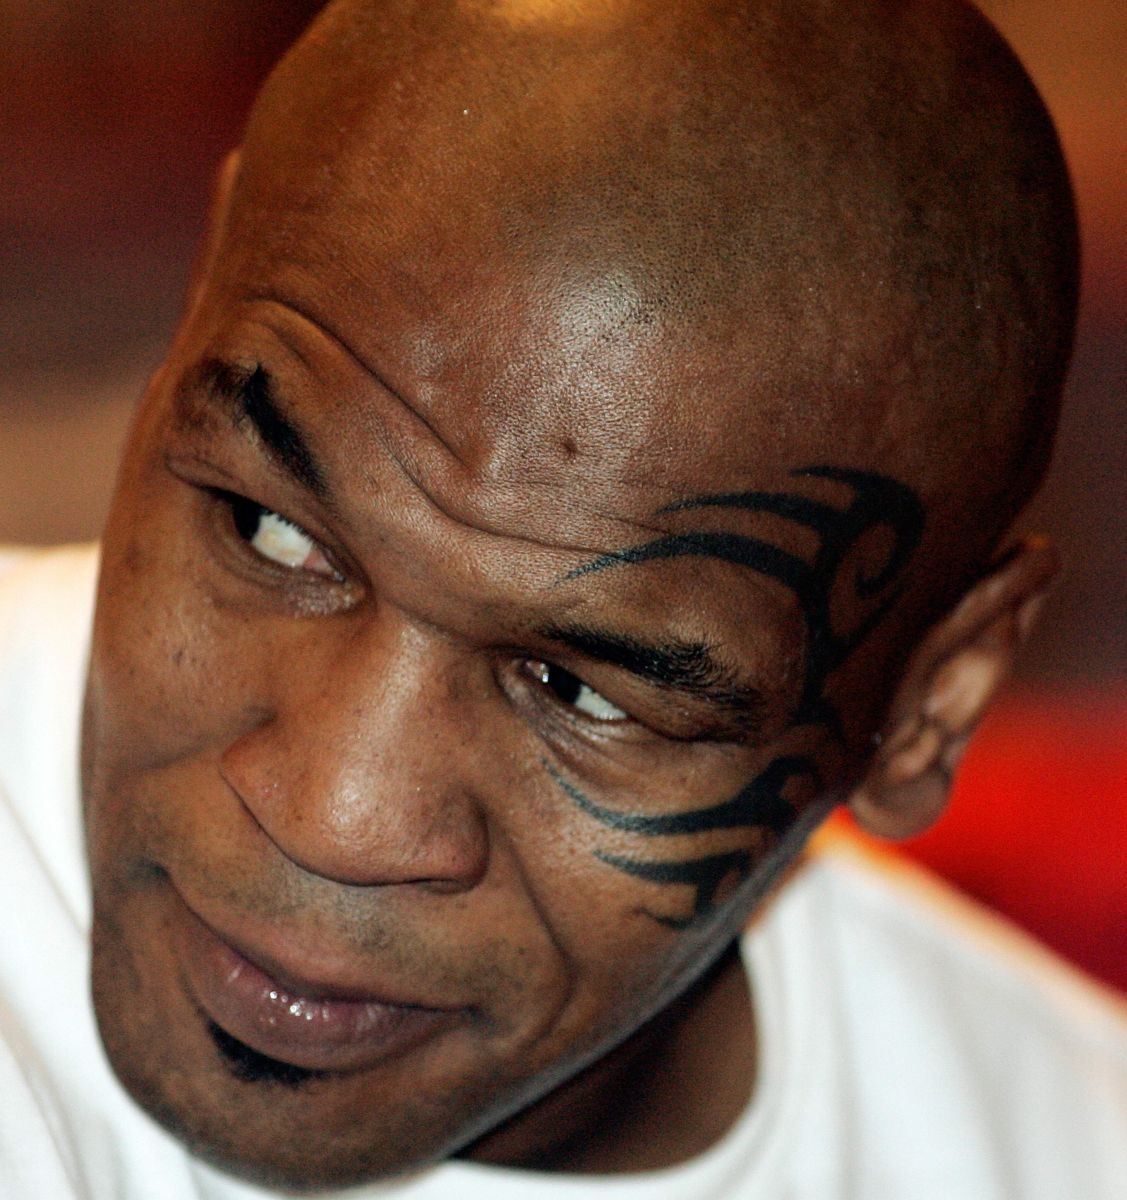 Fight hunger: Mike Tyson nearly knocked out his trainer [Video]